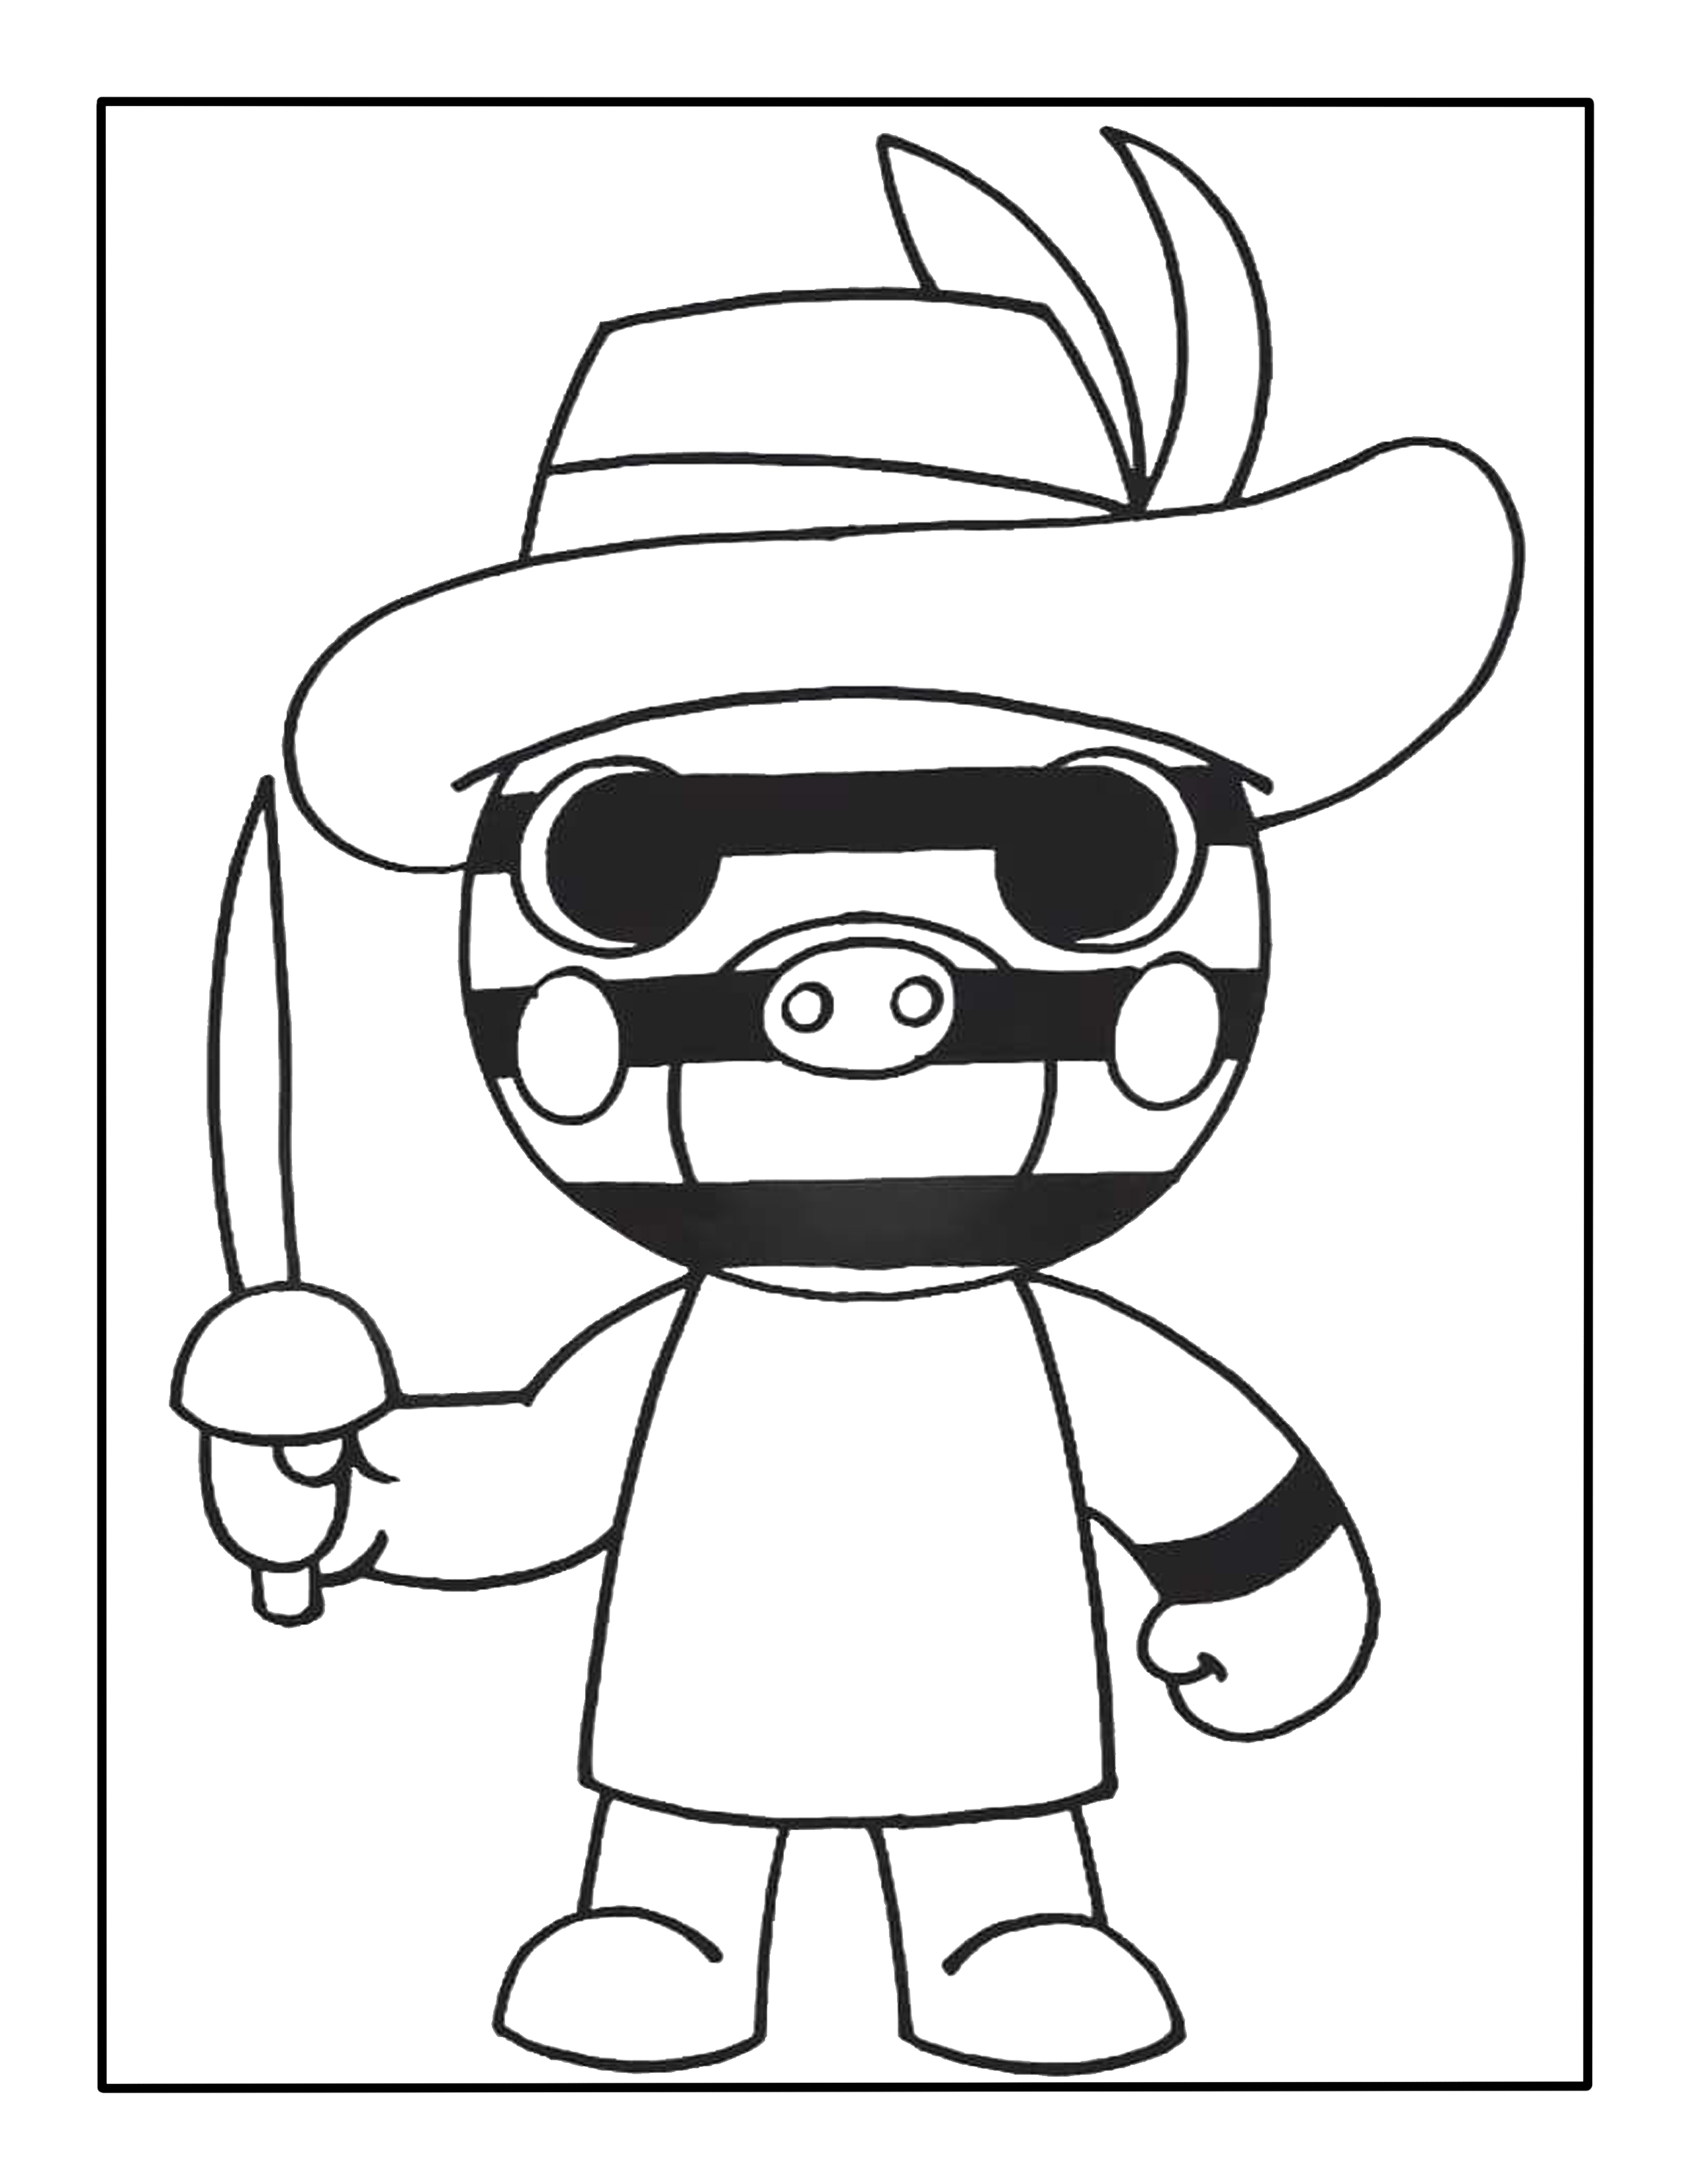 Zizzy coloring page â kimmi the clown